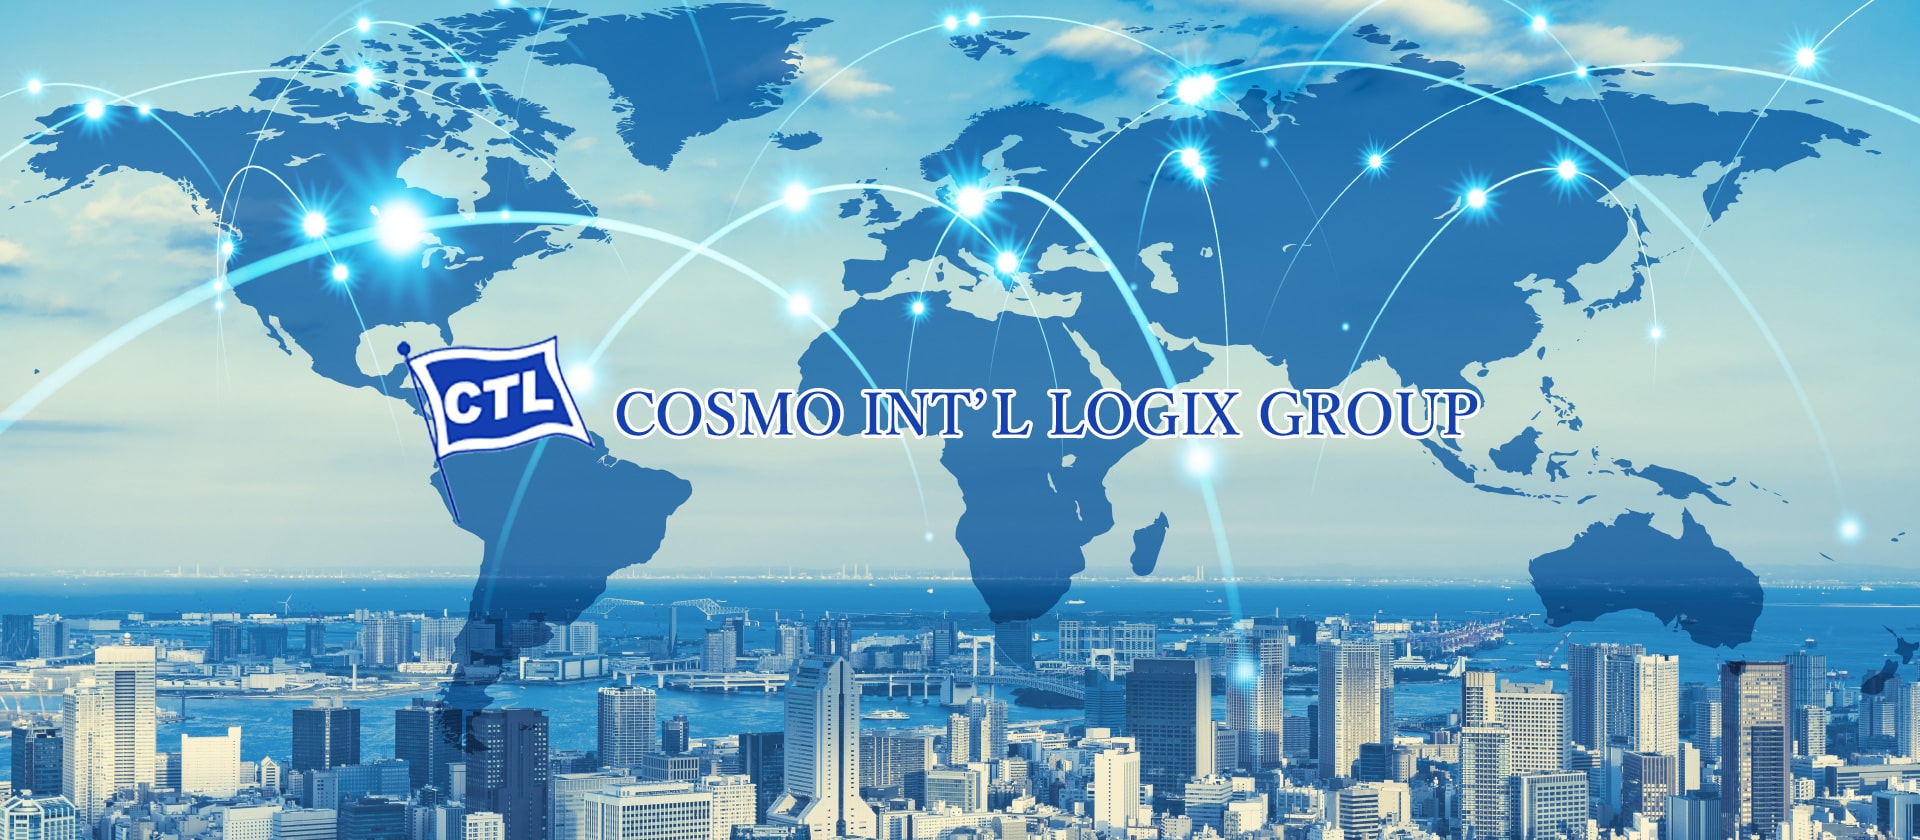 COSMO INT’L LOGIX GROUP